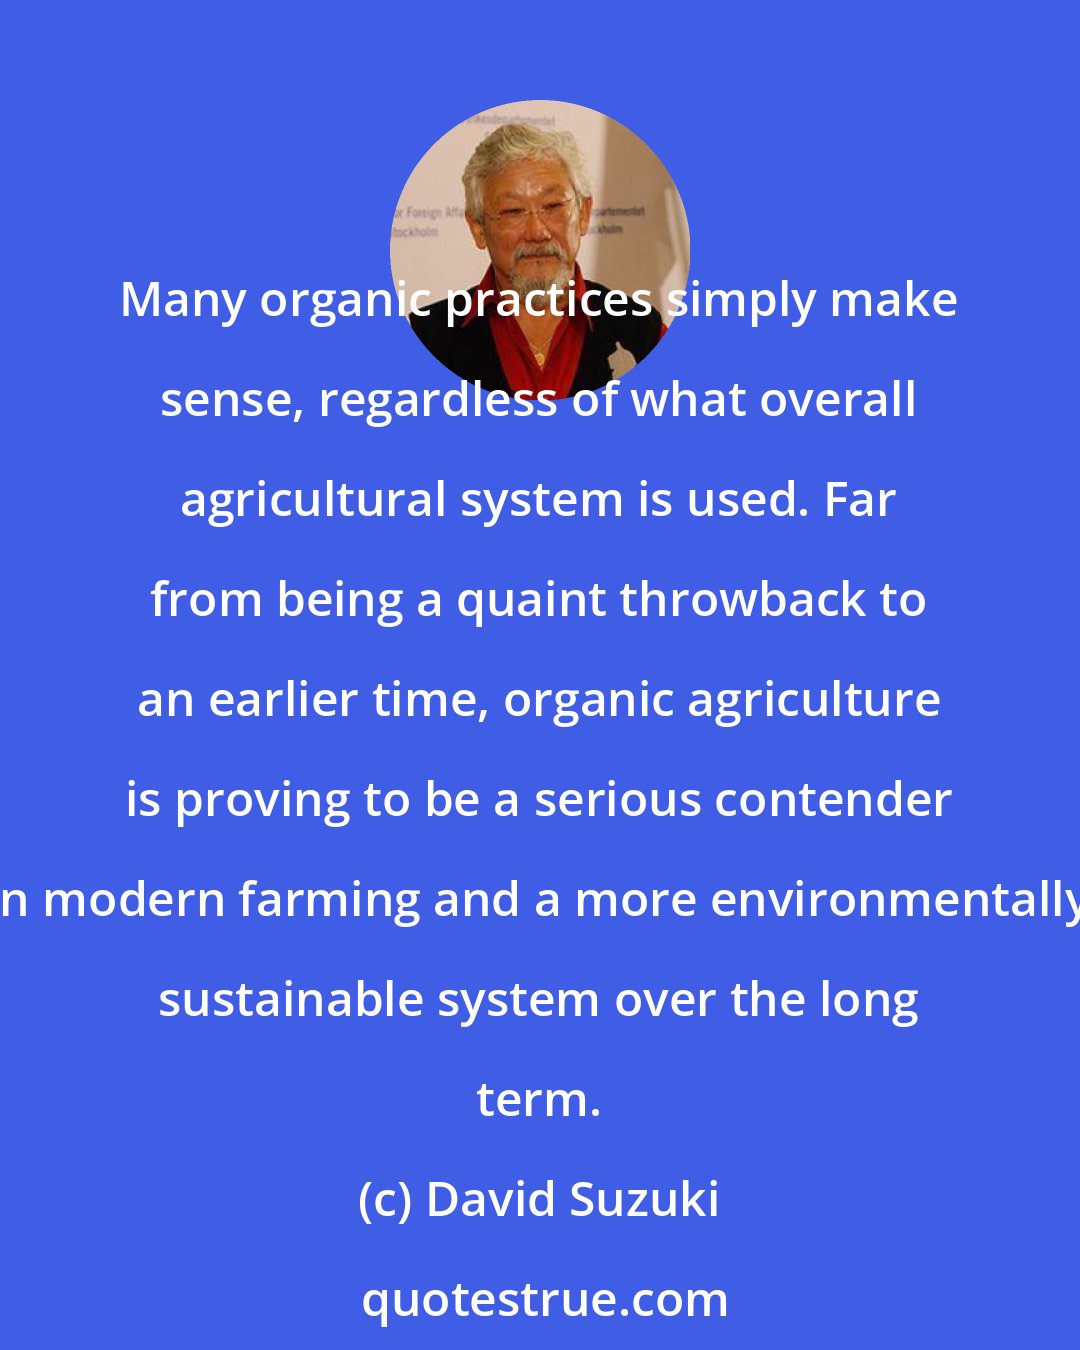 David Suzuki: Many organic practices simply make sense, regardless of what overall agricultural system is used. Far from being a quaint throwback to an earlier time, organic agriculture is proving to be a serious contender in modern farming and a more environmentally sustainable system over the long term.